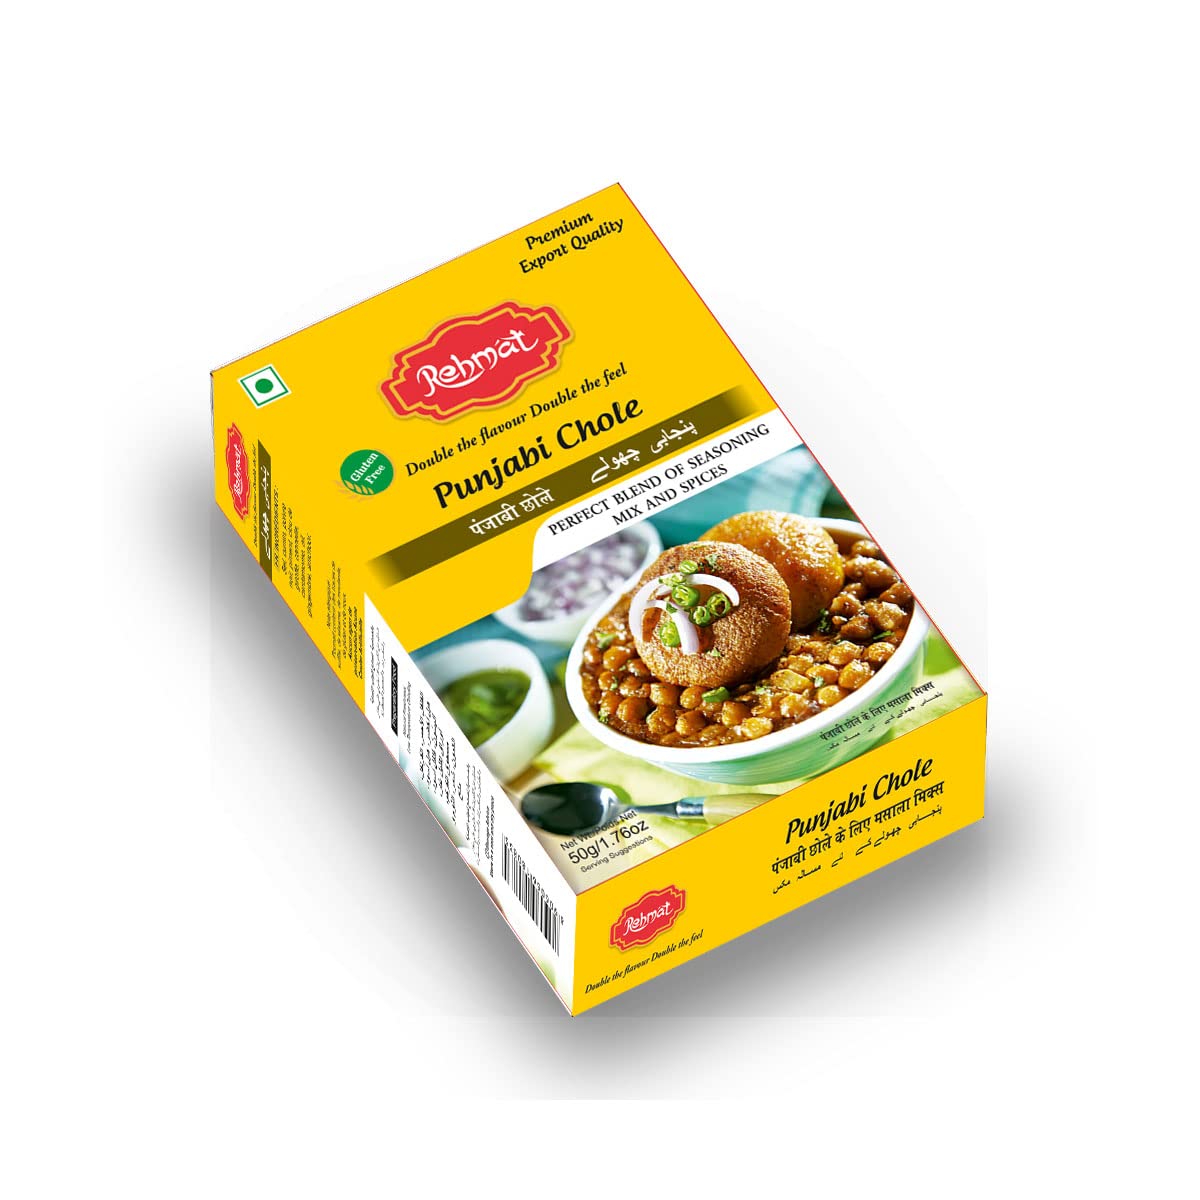 Rehmat Punjabi Chole Spices Masala, Easy to Cook with Blended Spice Mix for Healthy & Flavourful Cooking, 50gm